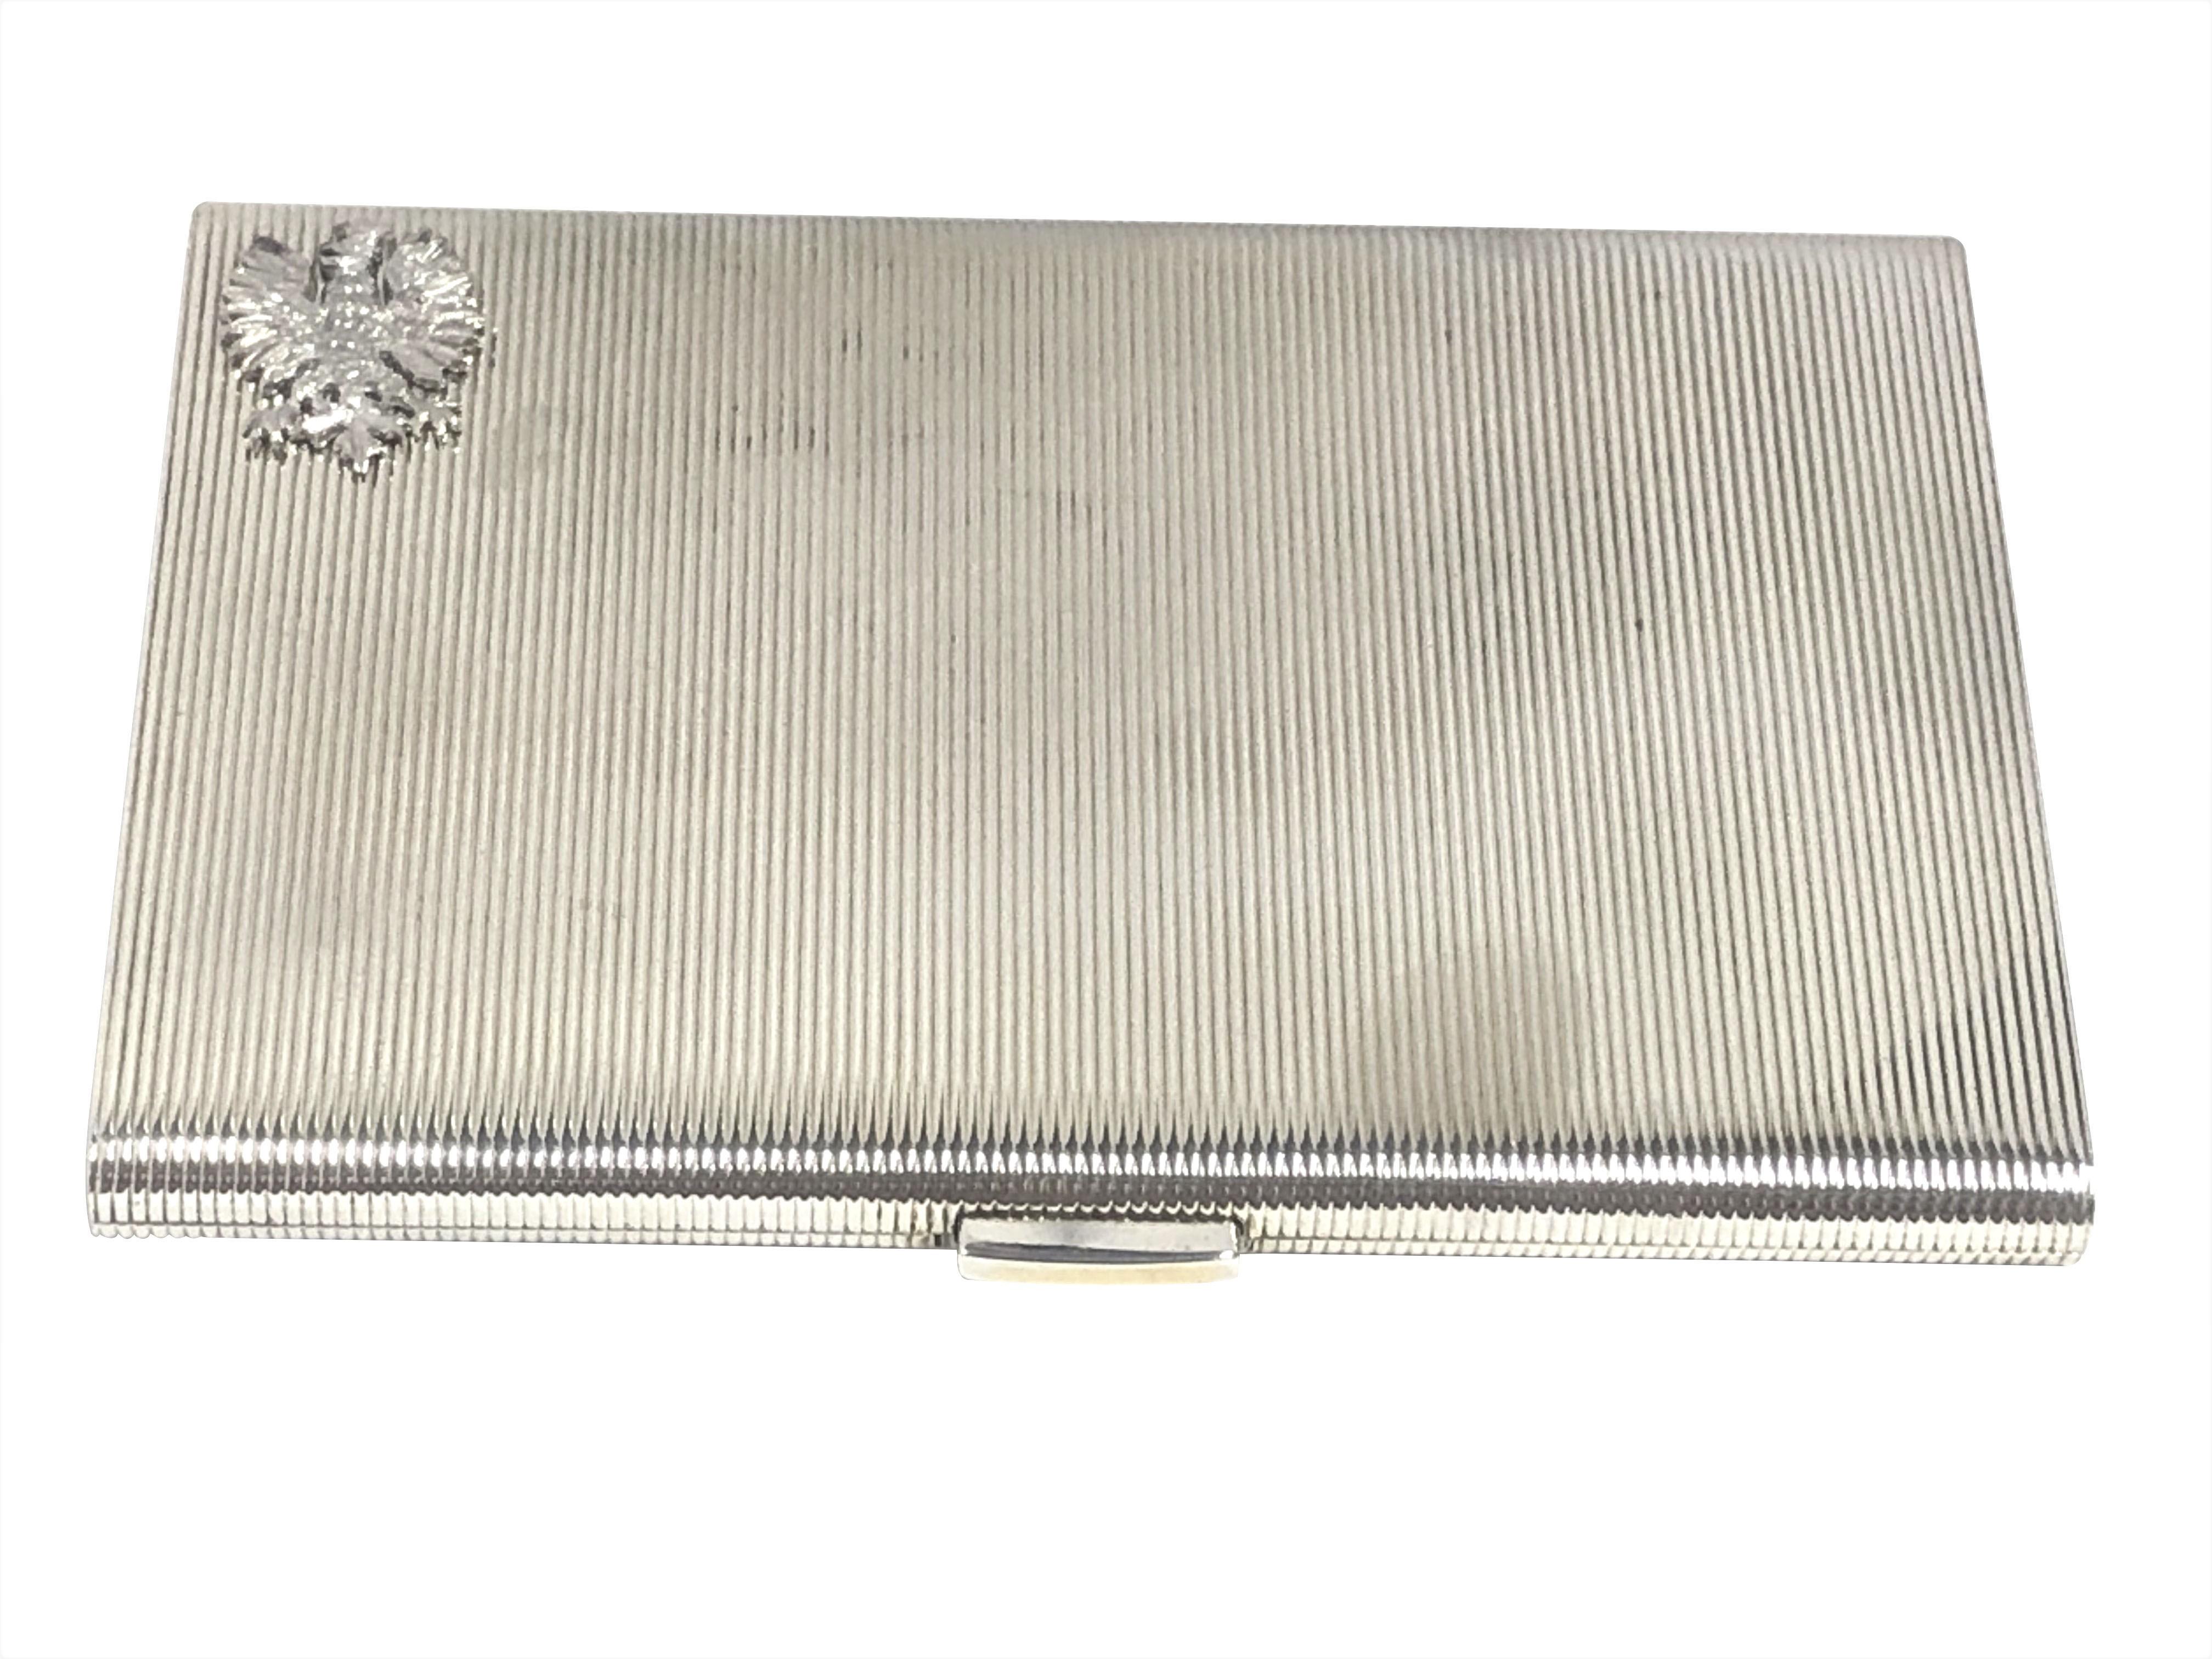 From the Estate of the Glamorous Hollywood Icon Zsa Zsa Gabor is this Circa 1940s Sterling Silver Cigarette Case, measuring 4 3/4 X 3 1/4 inches, having a ribbed design, a Gold washed interior and an applied Eagle Coat of Arms possibly Hungarian,